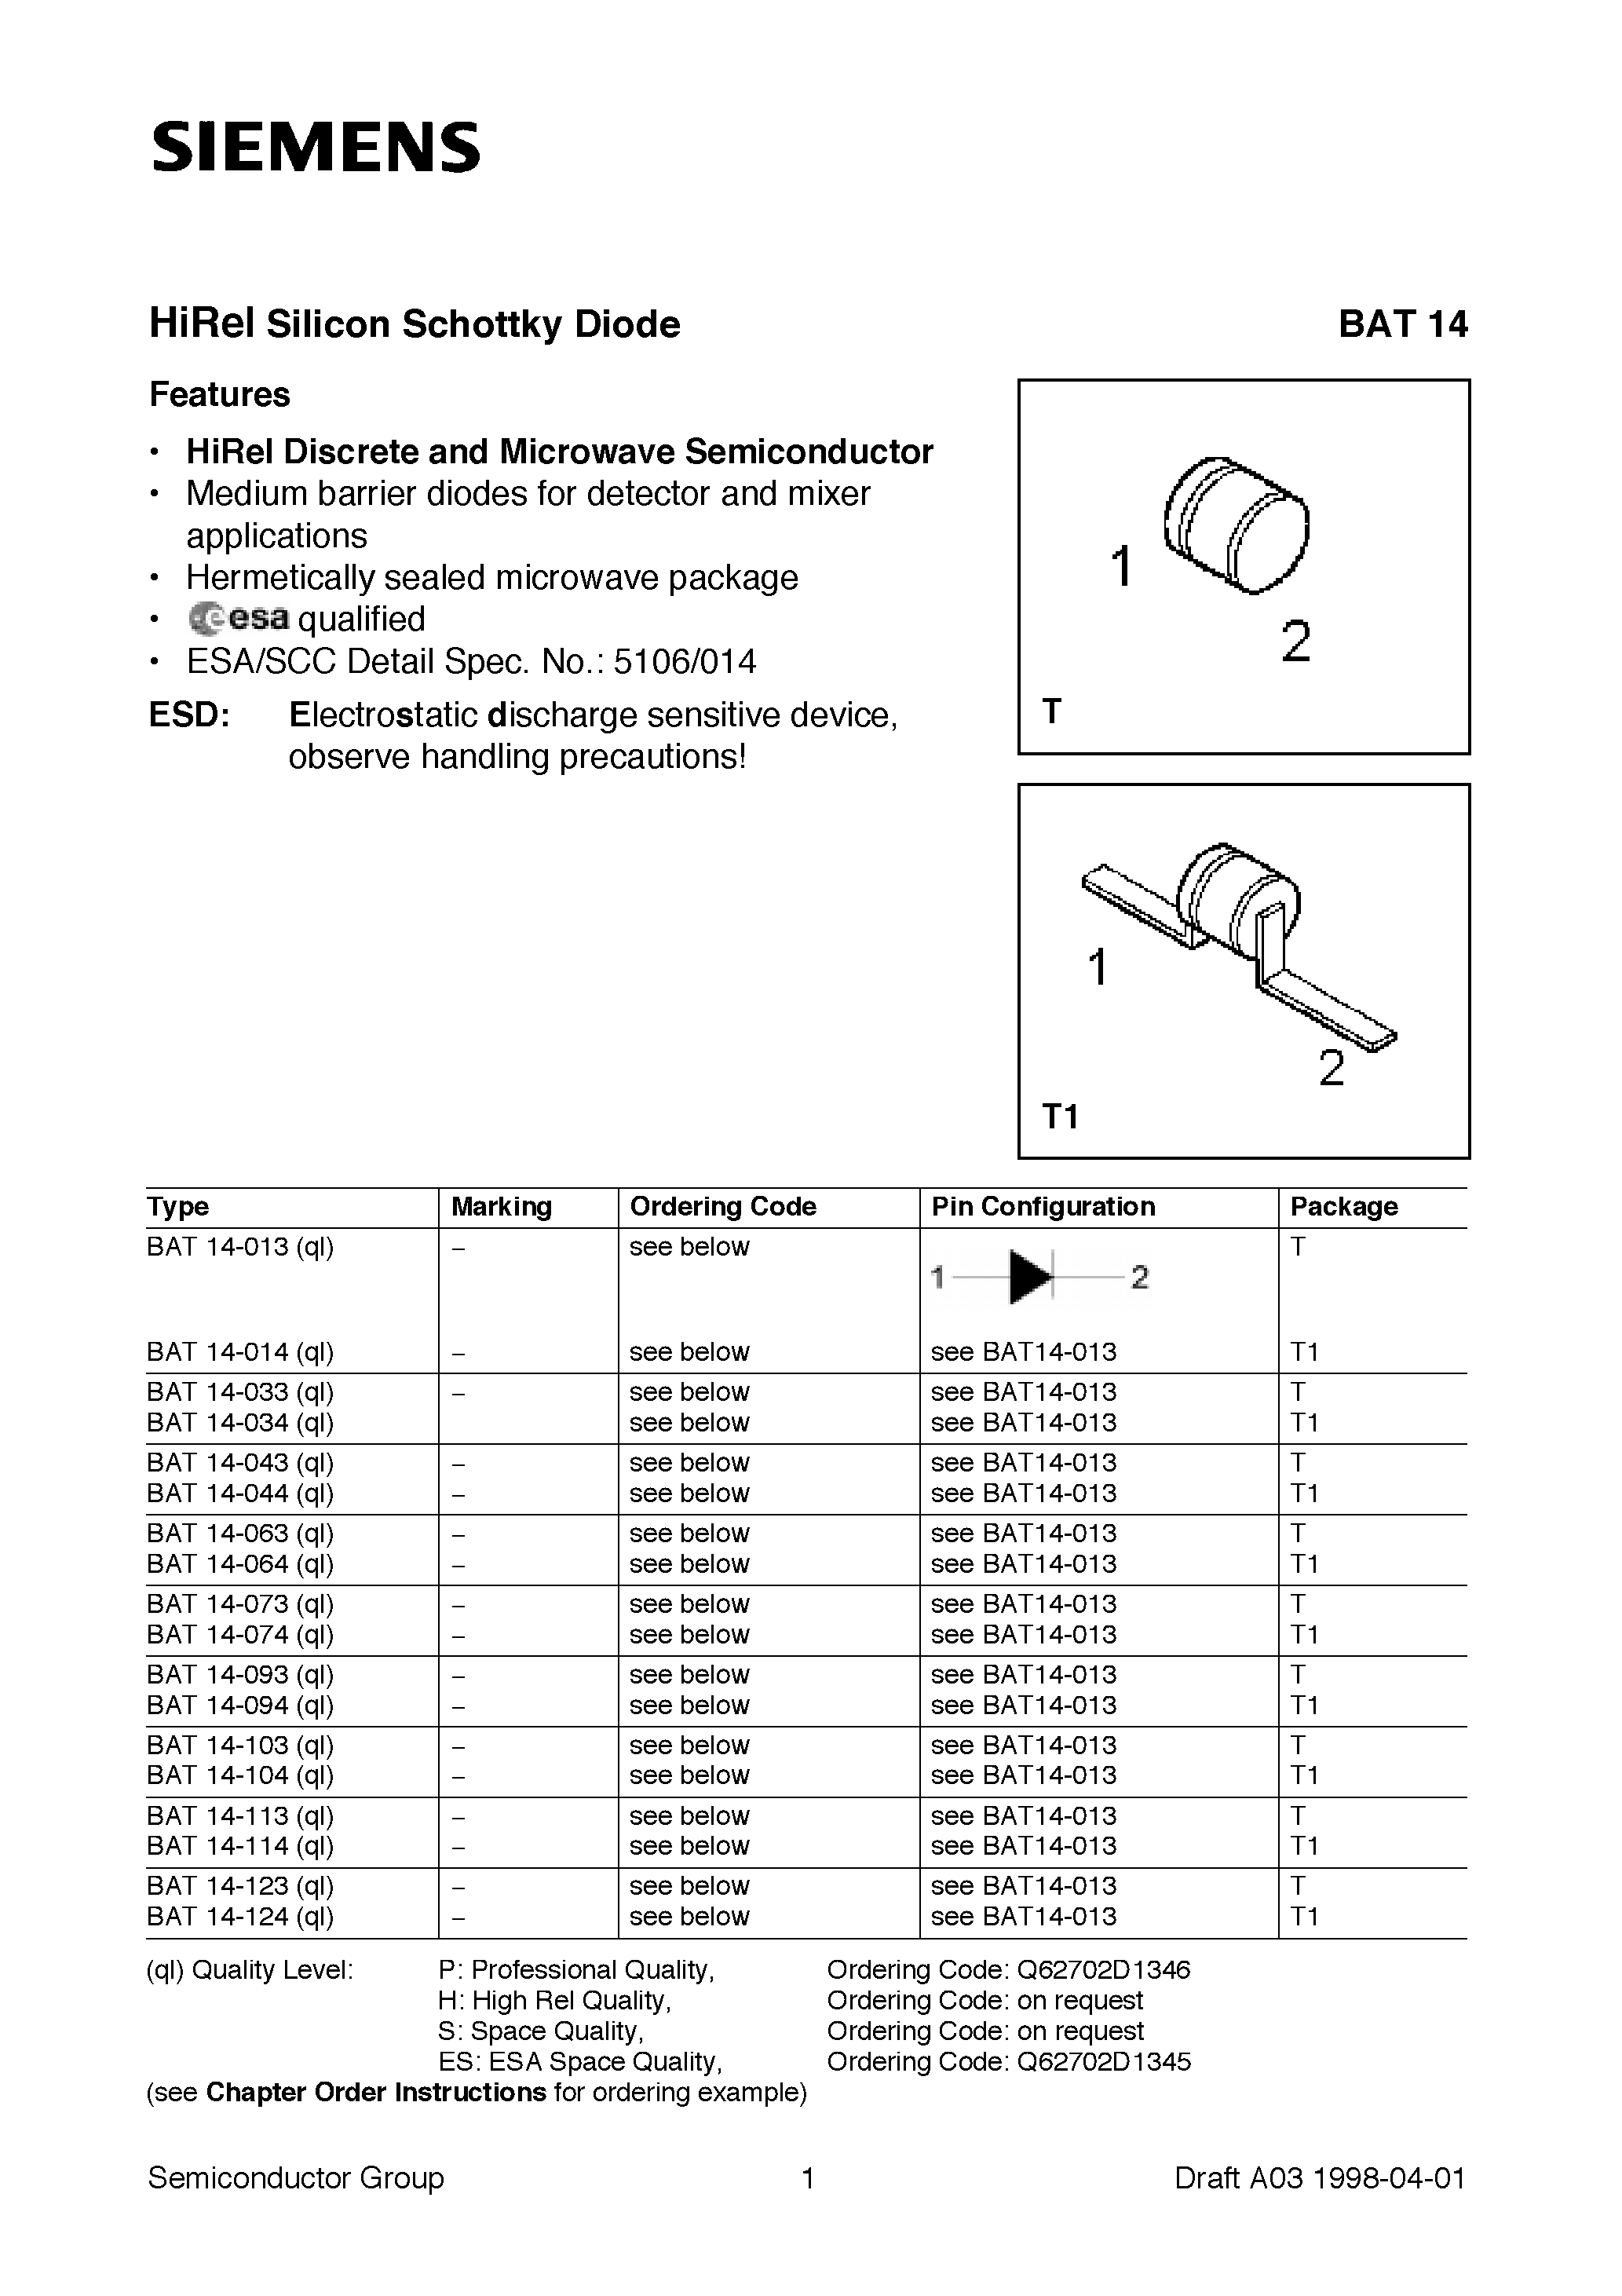 Datasheet BAT14-063 - HiRel Silicon Schottky Diode (HiRel Discrete and Microwave Semiconductor Medium barrier diodes for detector and mixer applications) page 1